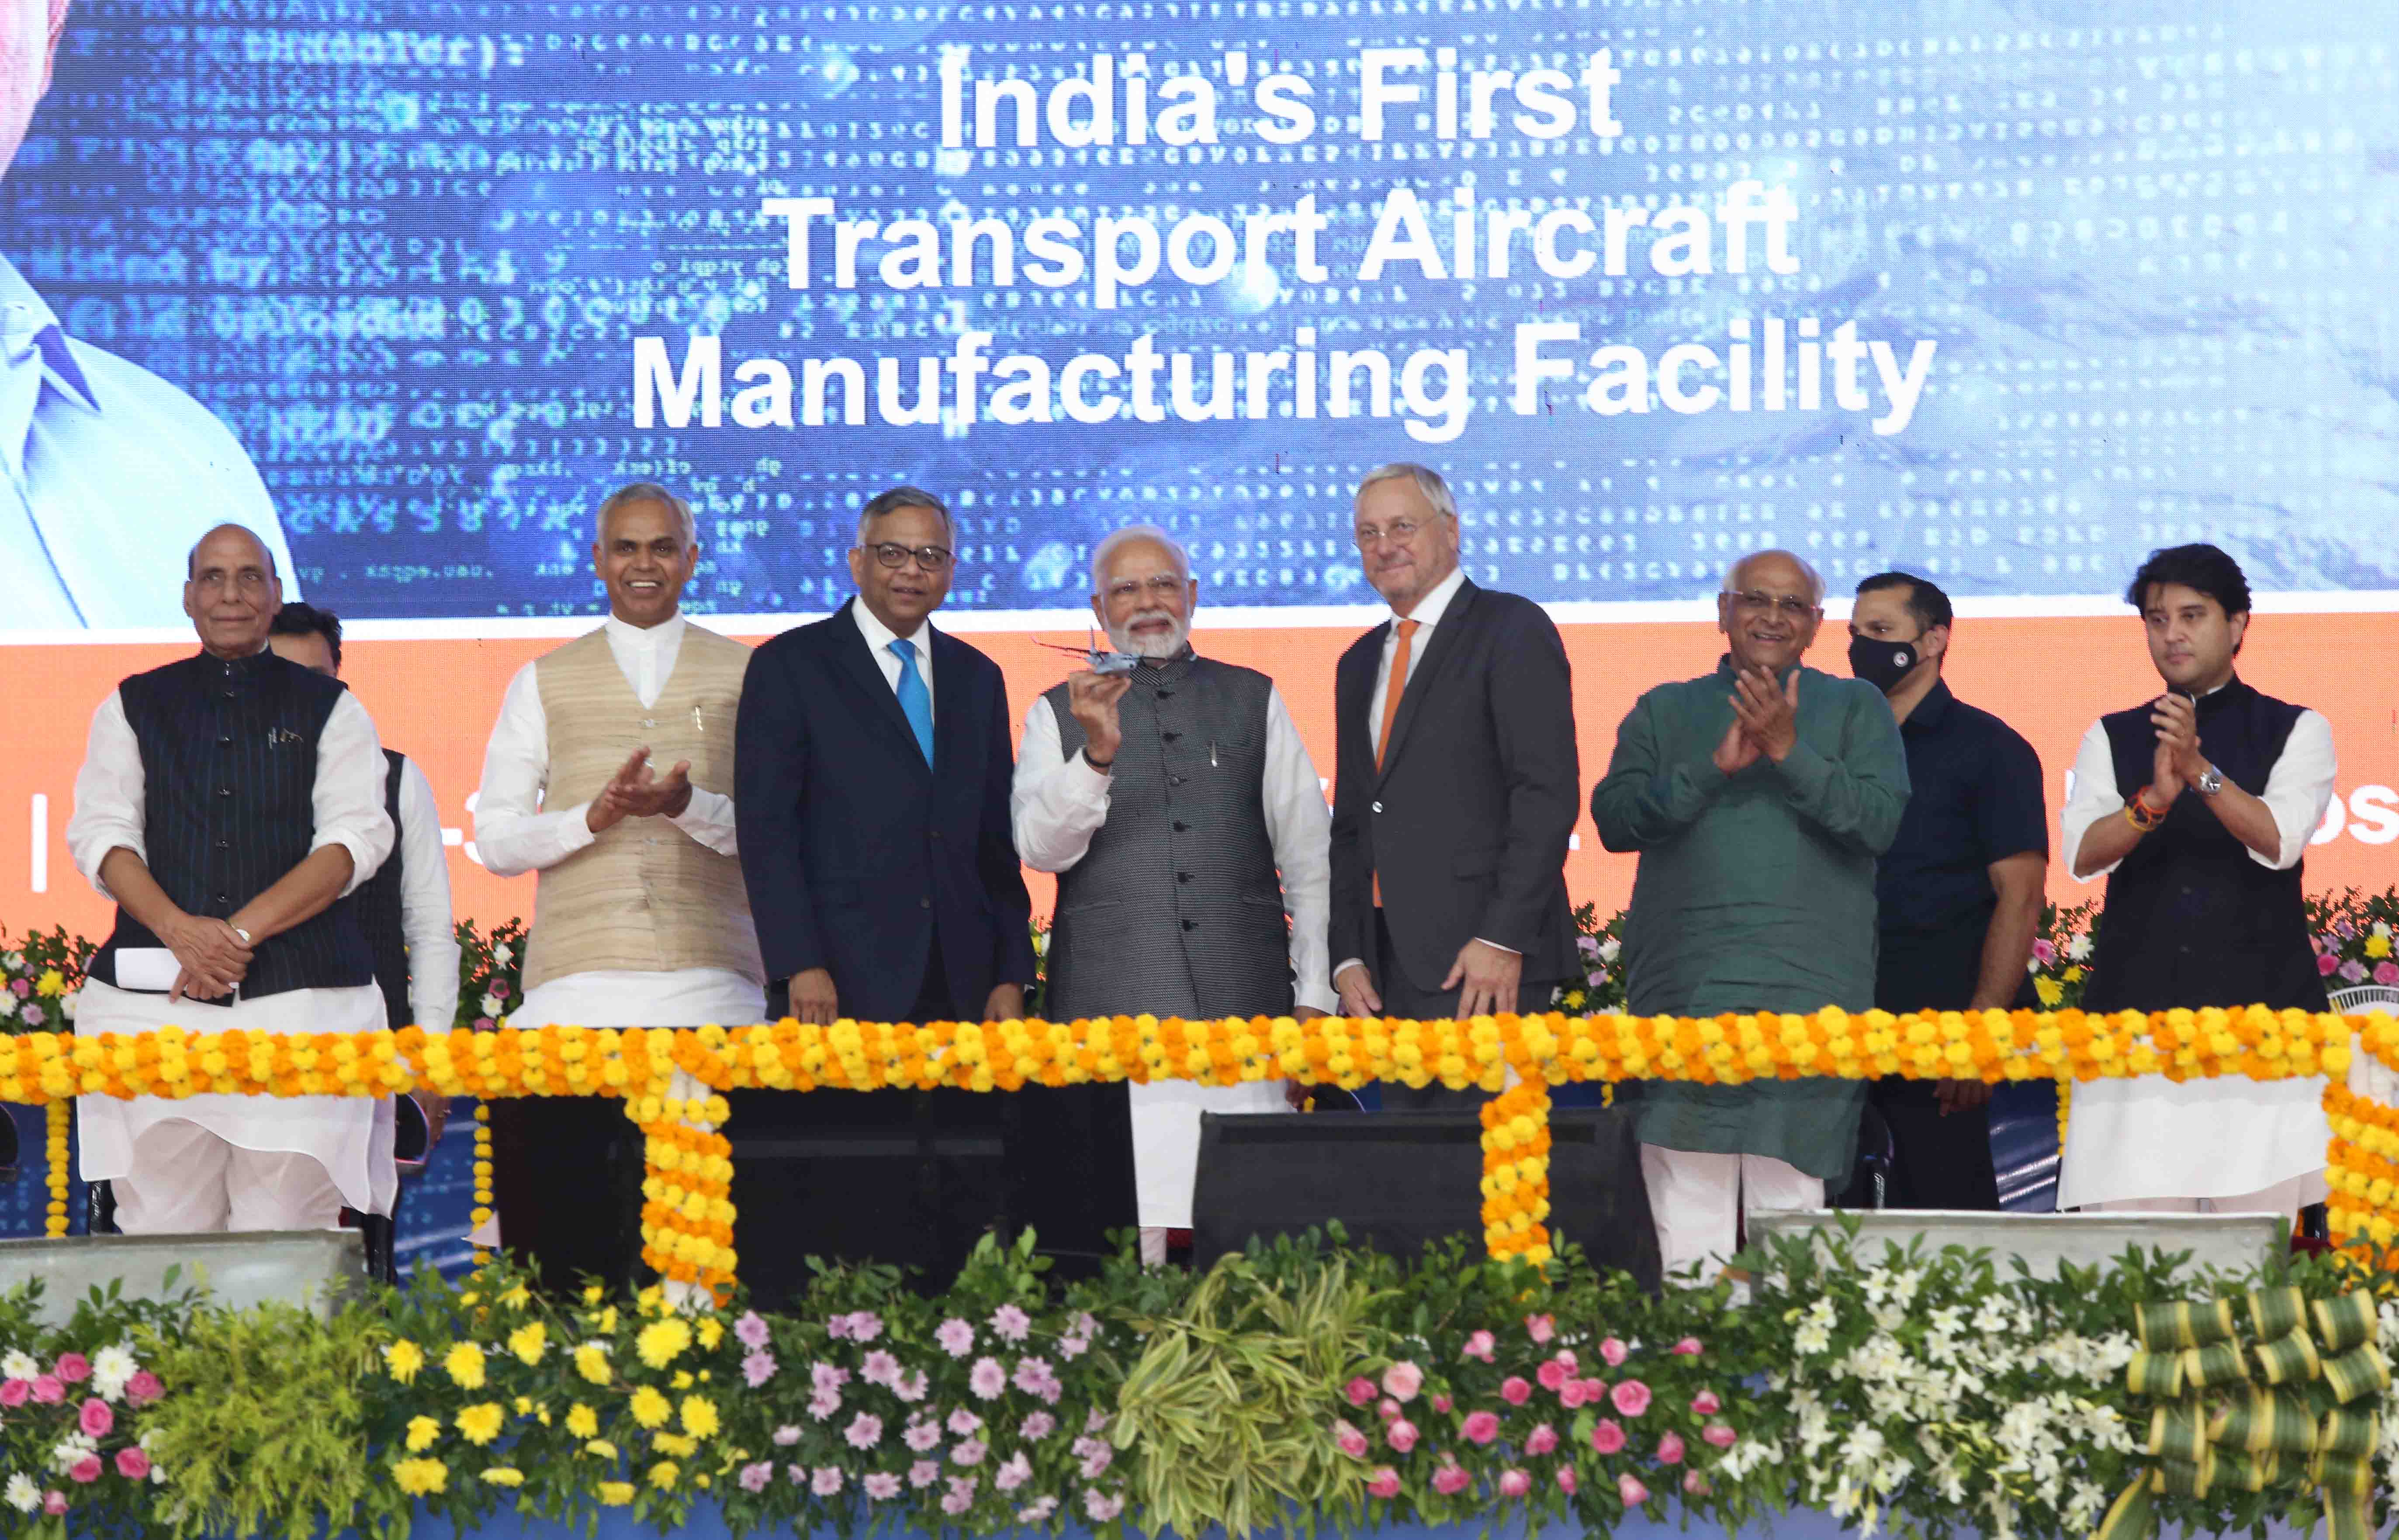 PM Shri Narendra Modi with Tata Sons Chairman Shri N Chandrasekaran & Airbus Chief Commercial Officer Mr. Christian Scherer at the foundation stone laying event in Vadodara, Gujarat